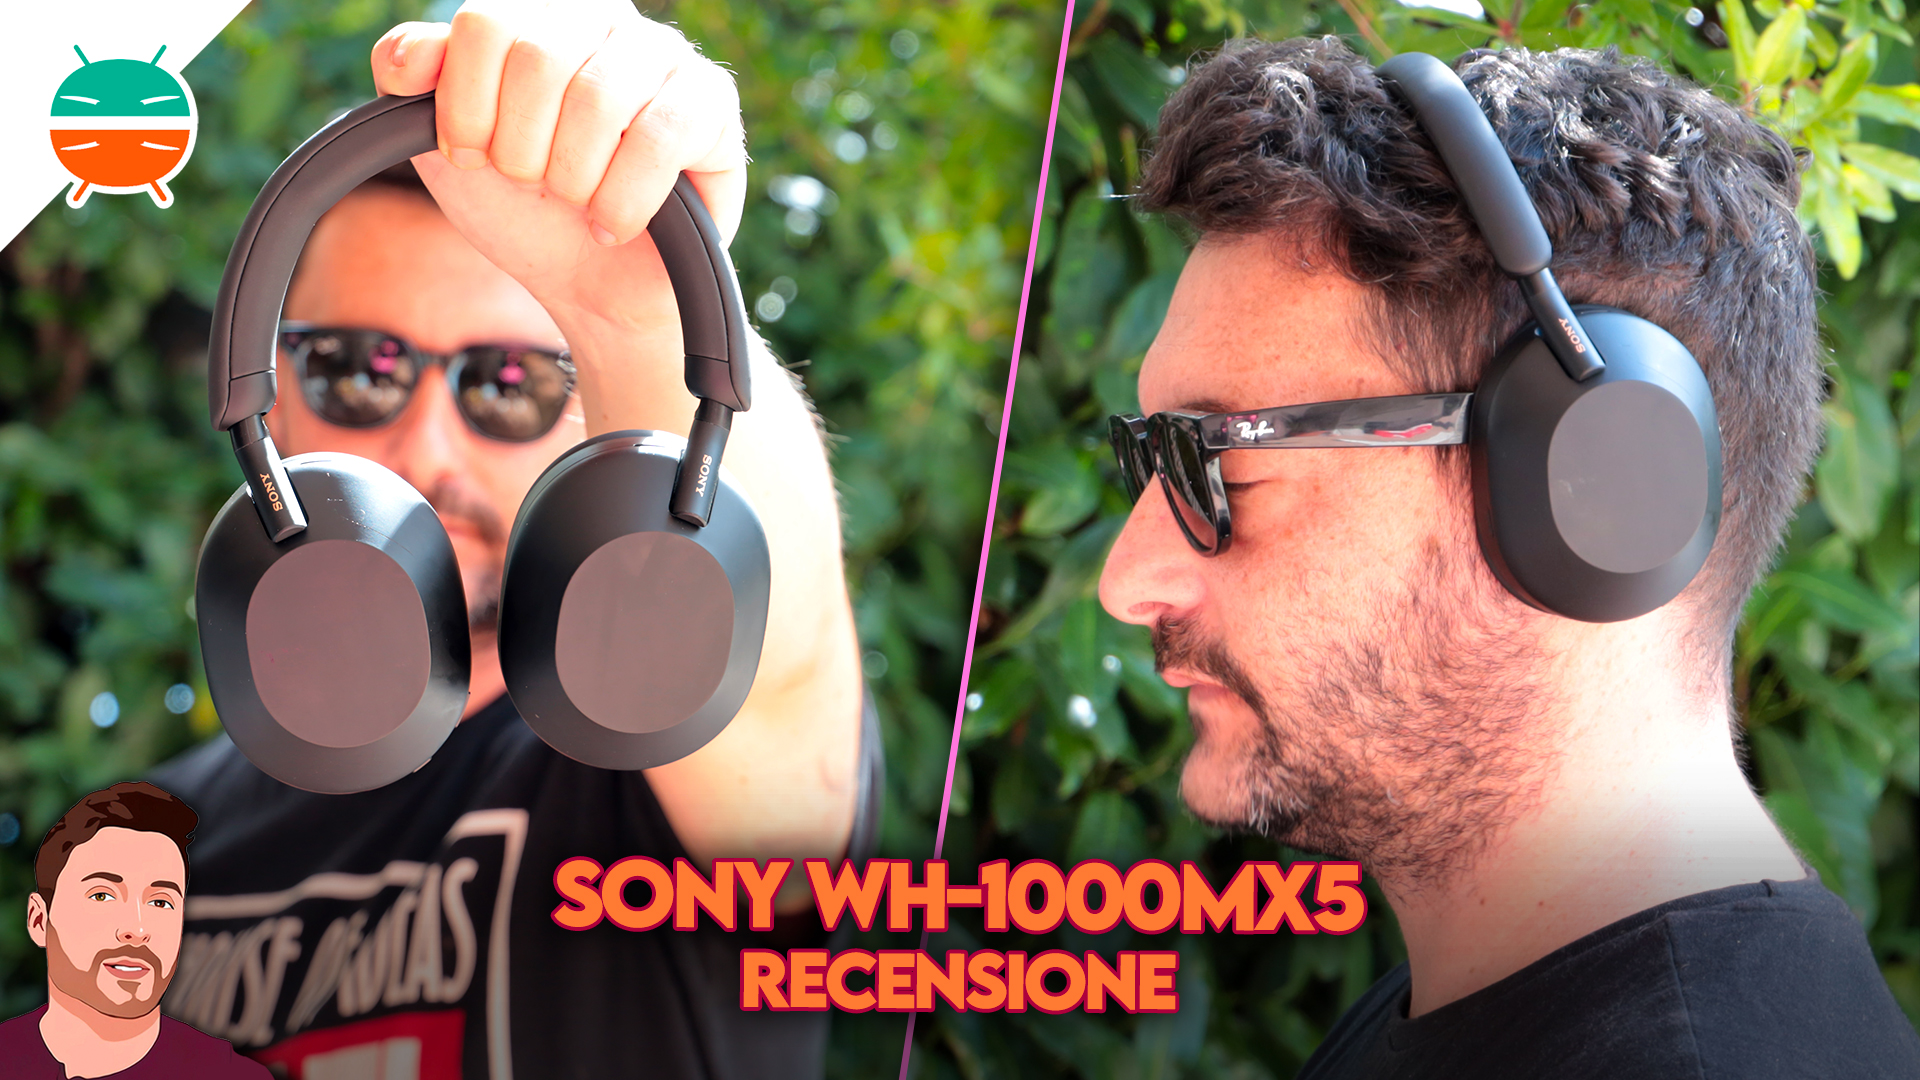 Sony WH-1000MX5 review: my ears thank - GizChina.it